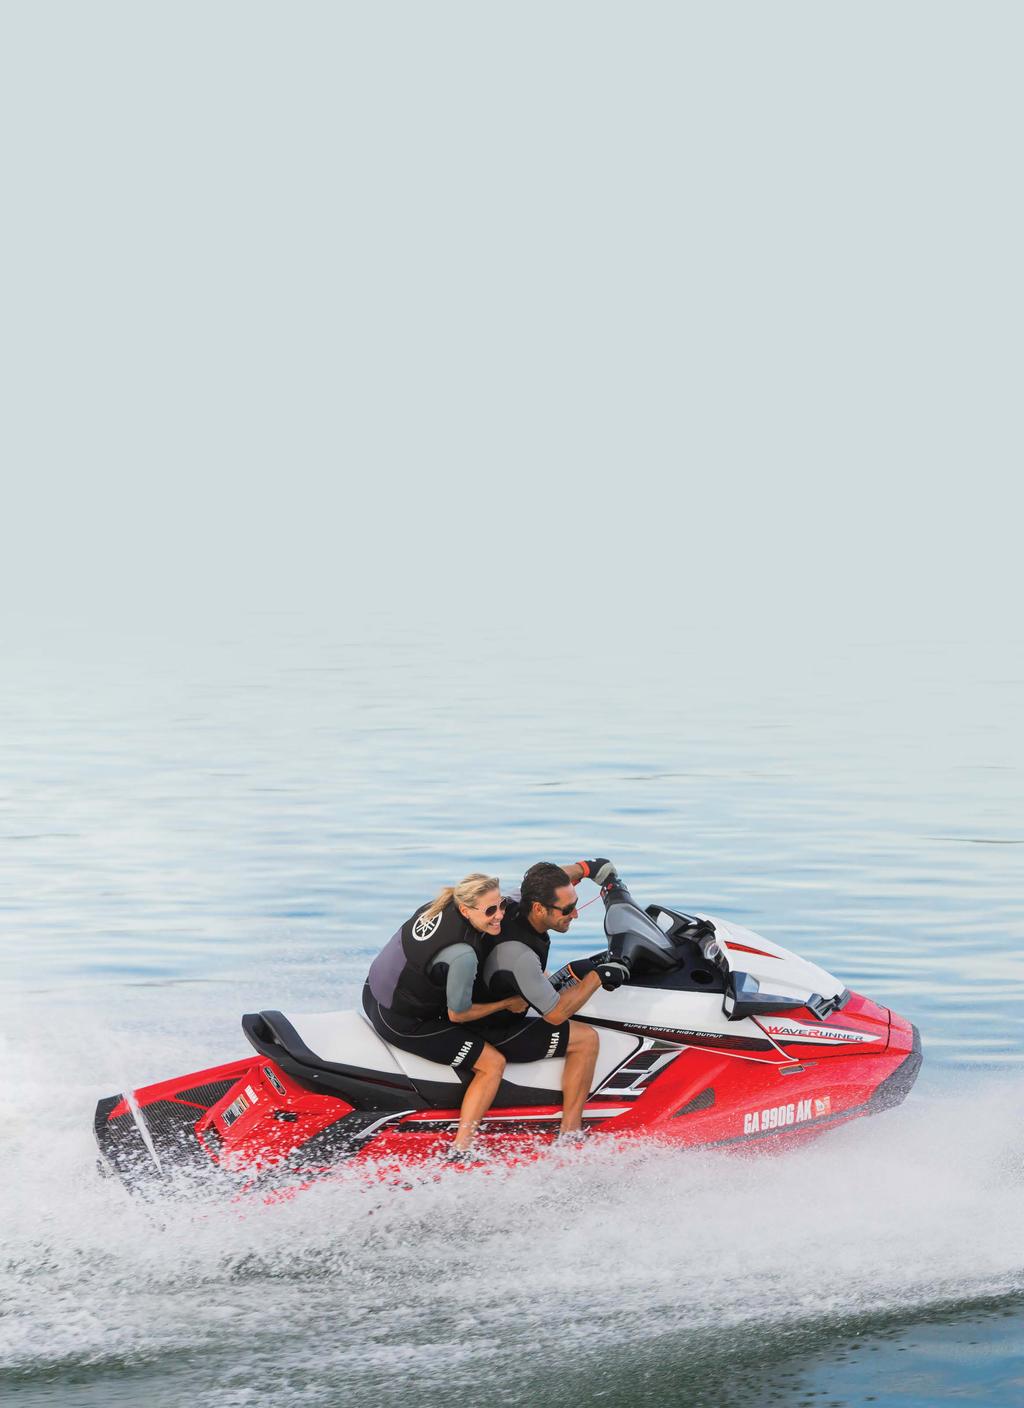 CONTENTS ABOUT YAMAHA MARINE INSURANCE 1 IMPORTANT INFORMATION 3 BOAT & PERSONAL WATERCRAFT COvEr 6 Additional Benefits 7 Optional Benefits 12 Legal Liability CoveR 14 Exclusions to Your Liability 16